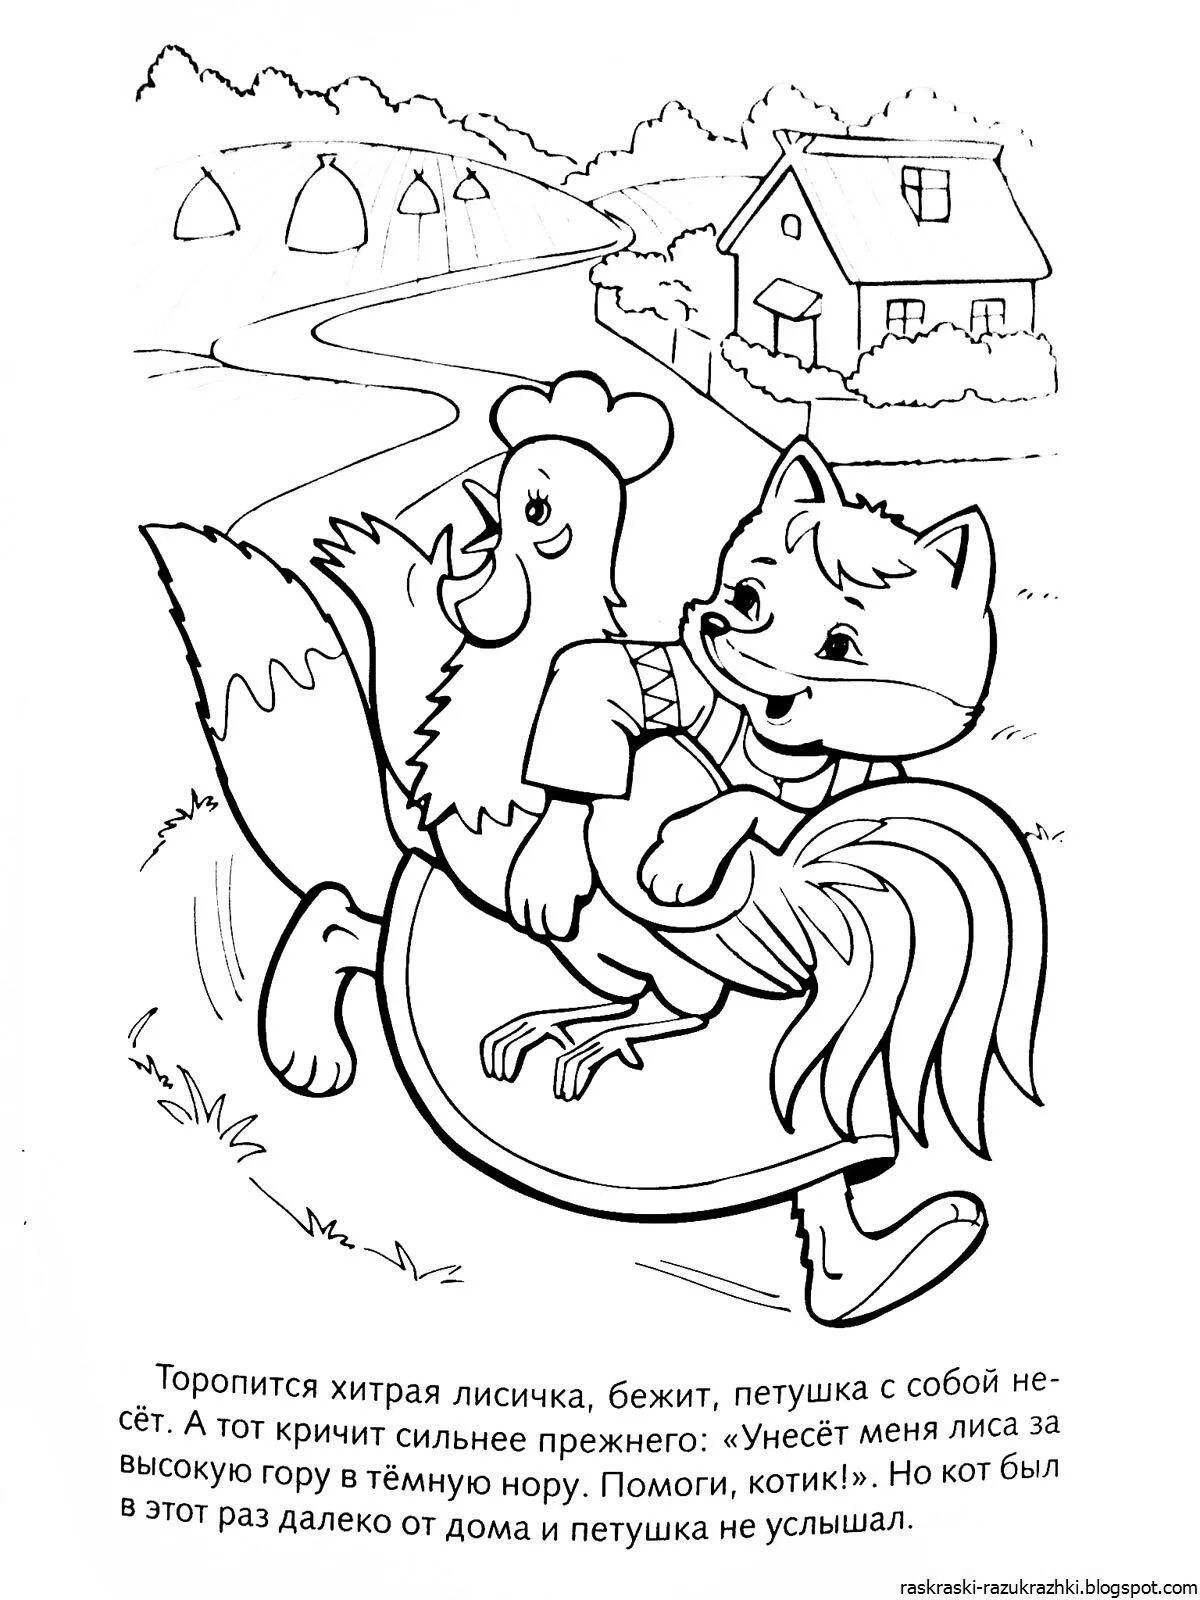 Delightful coloring fox and rooster Russian folk tale